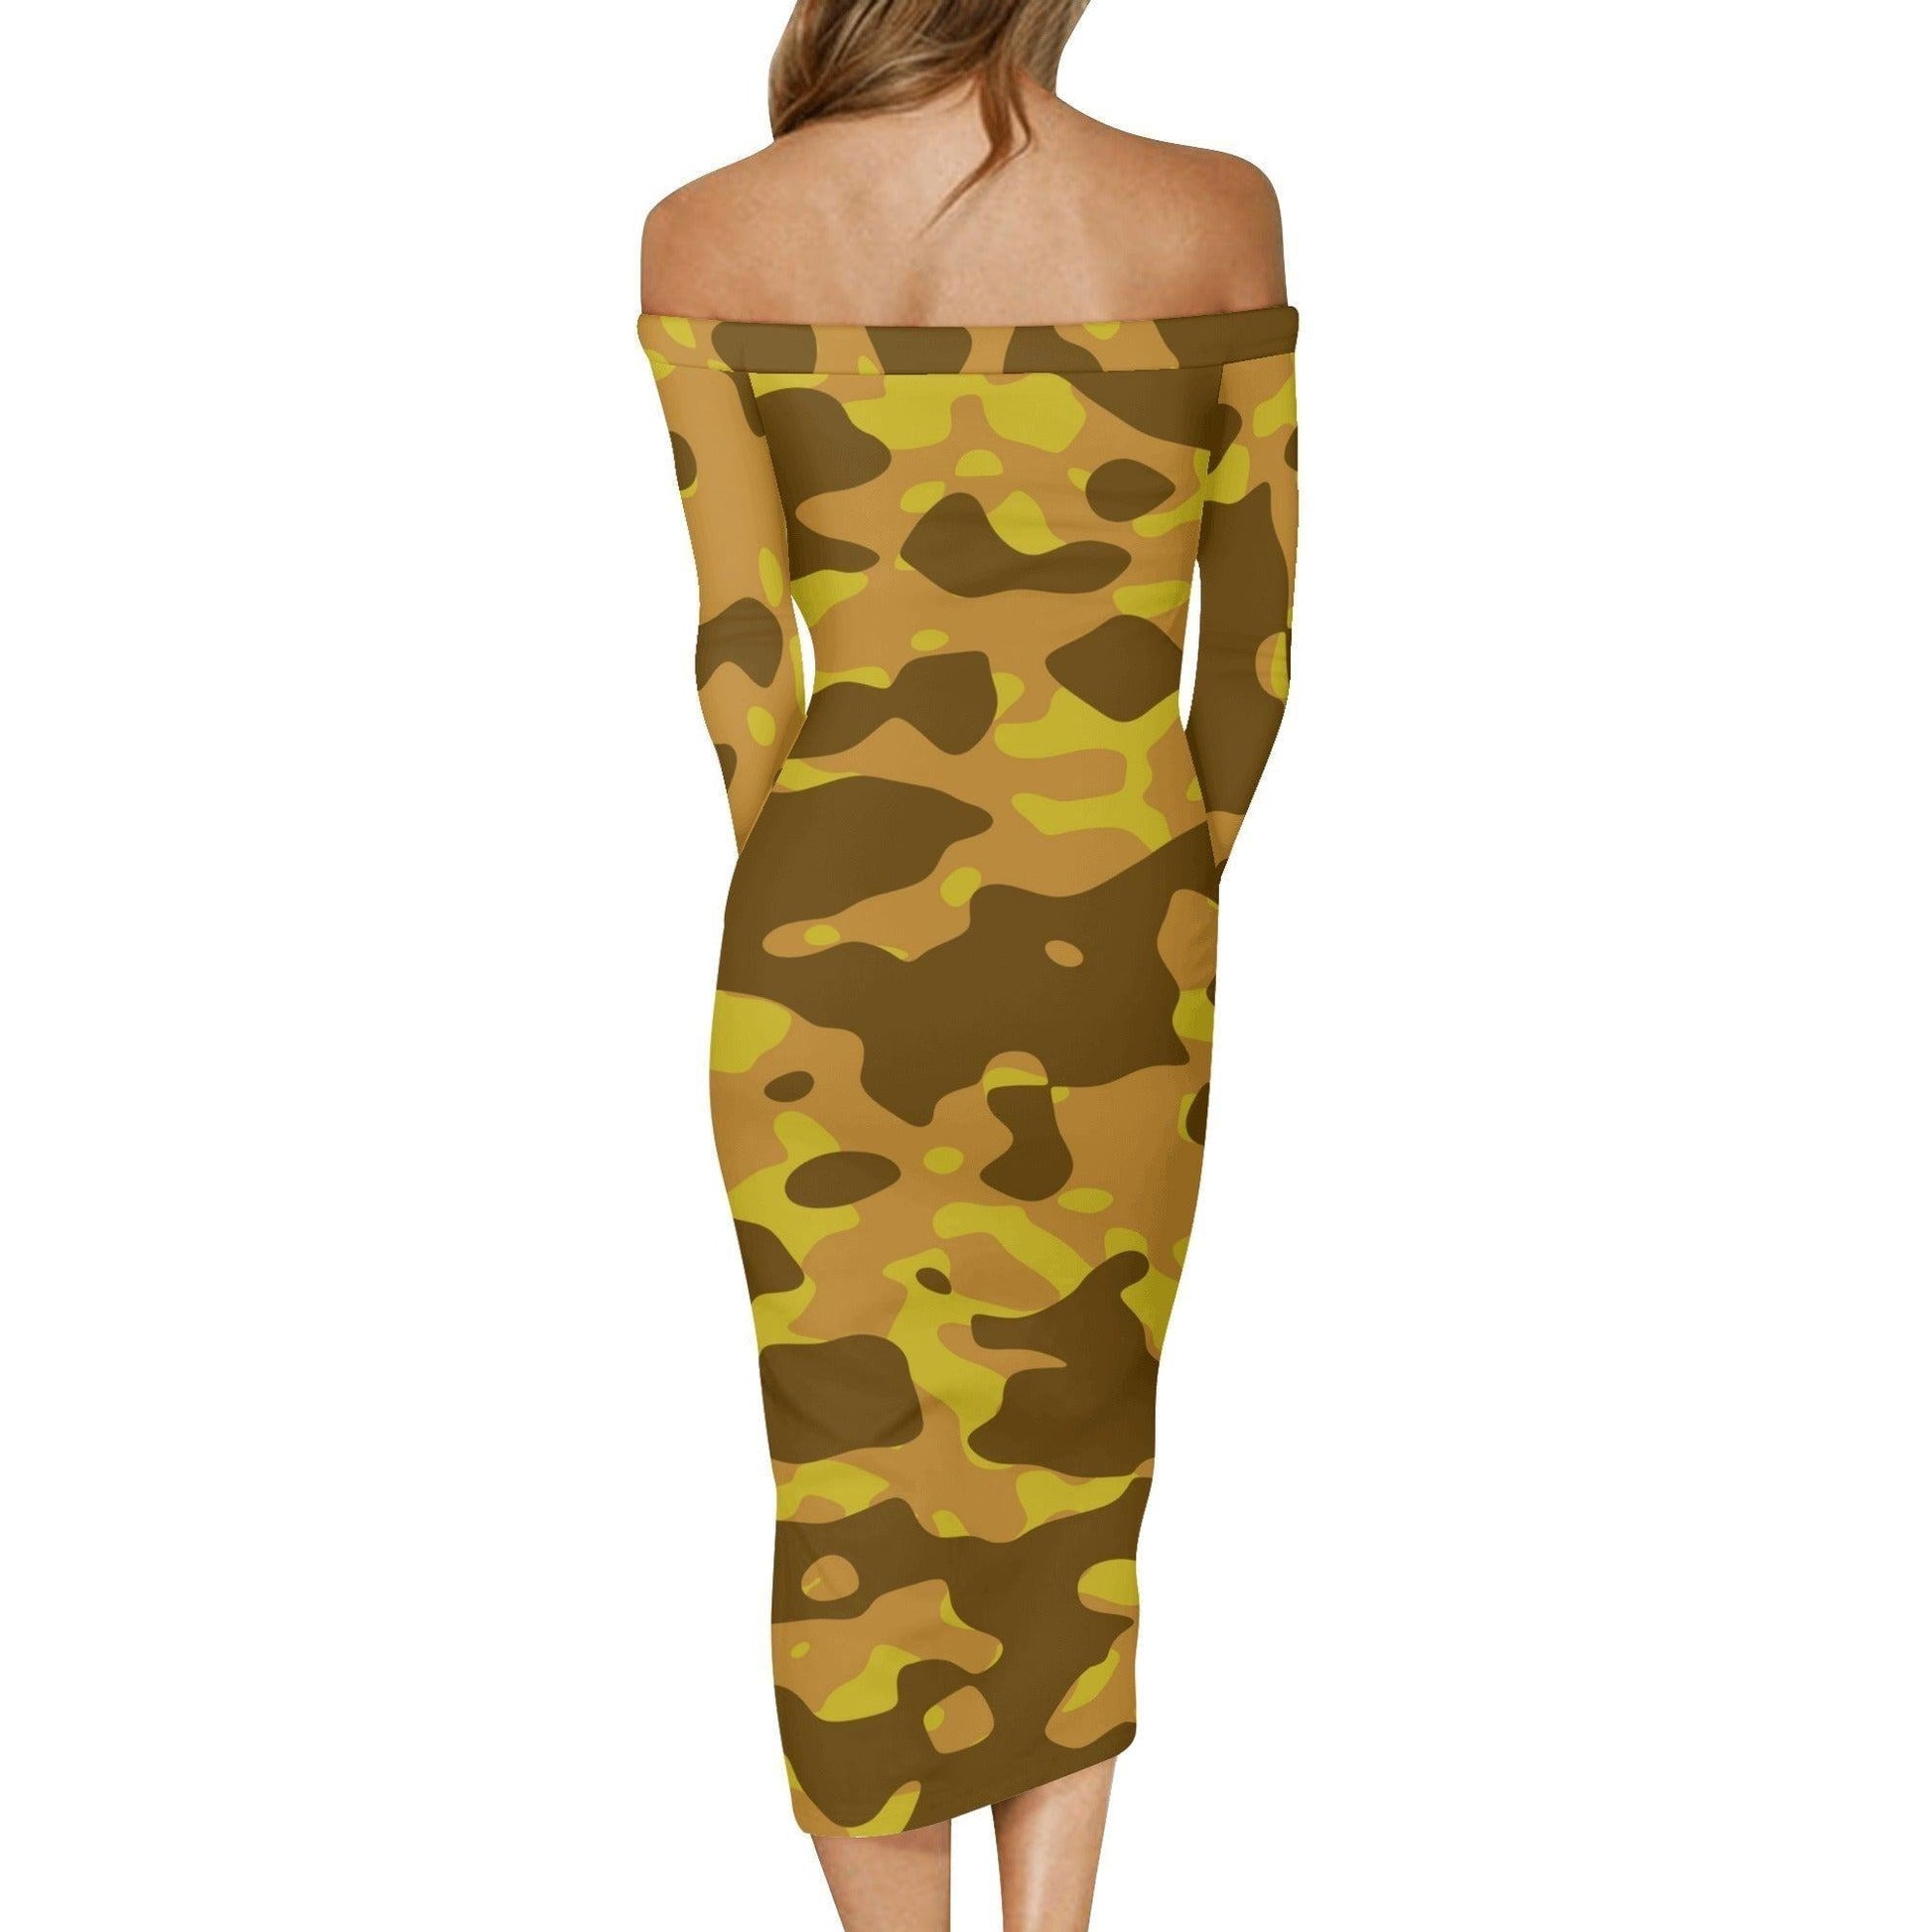 Yellow Camouflage Long Sleeve Off-Shoulder-Kleid -- Yellow Camouflage Long Sleeve Off-Shoulder-Kleid - undefined Off-Shoulder-Kleid | JLR Design